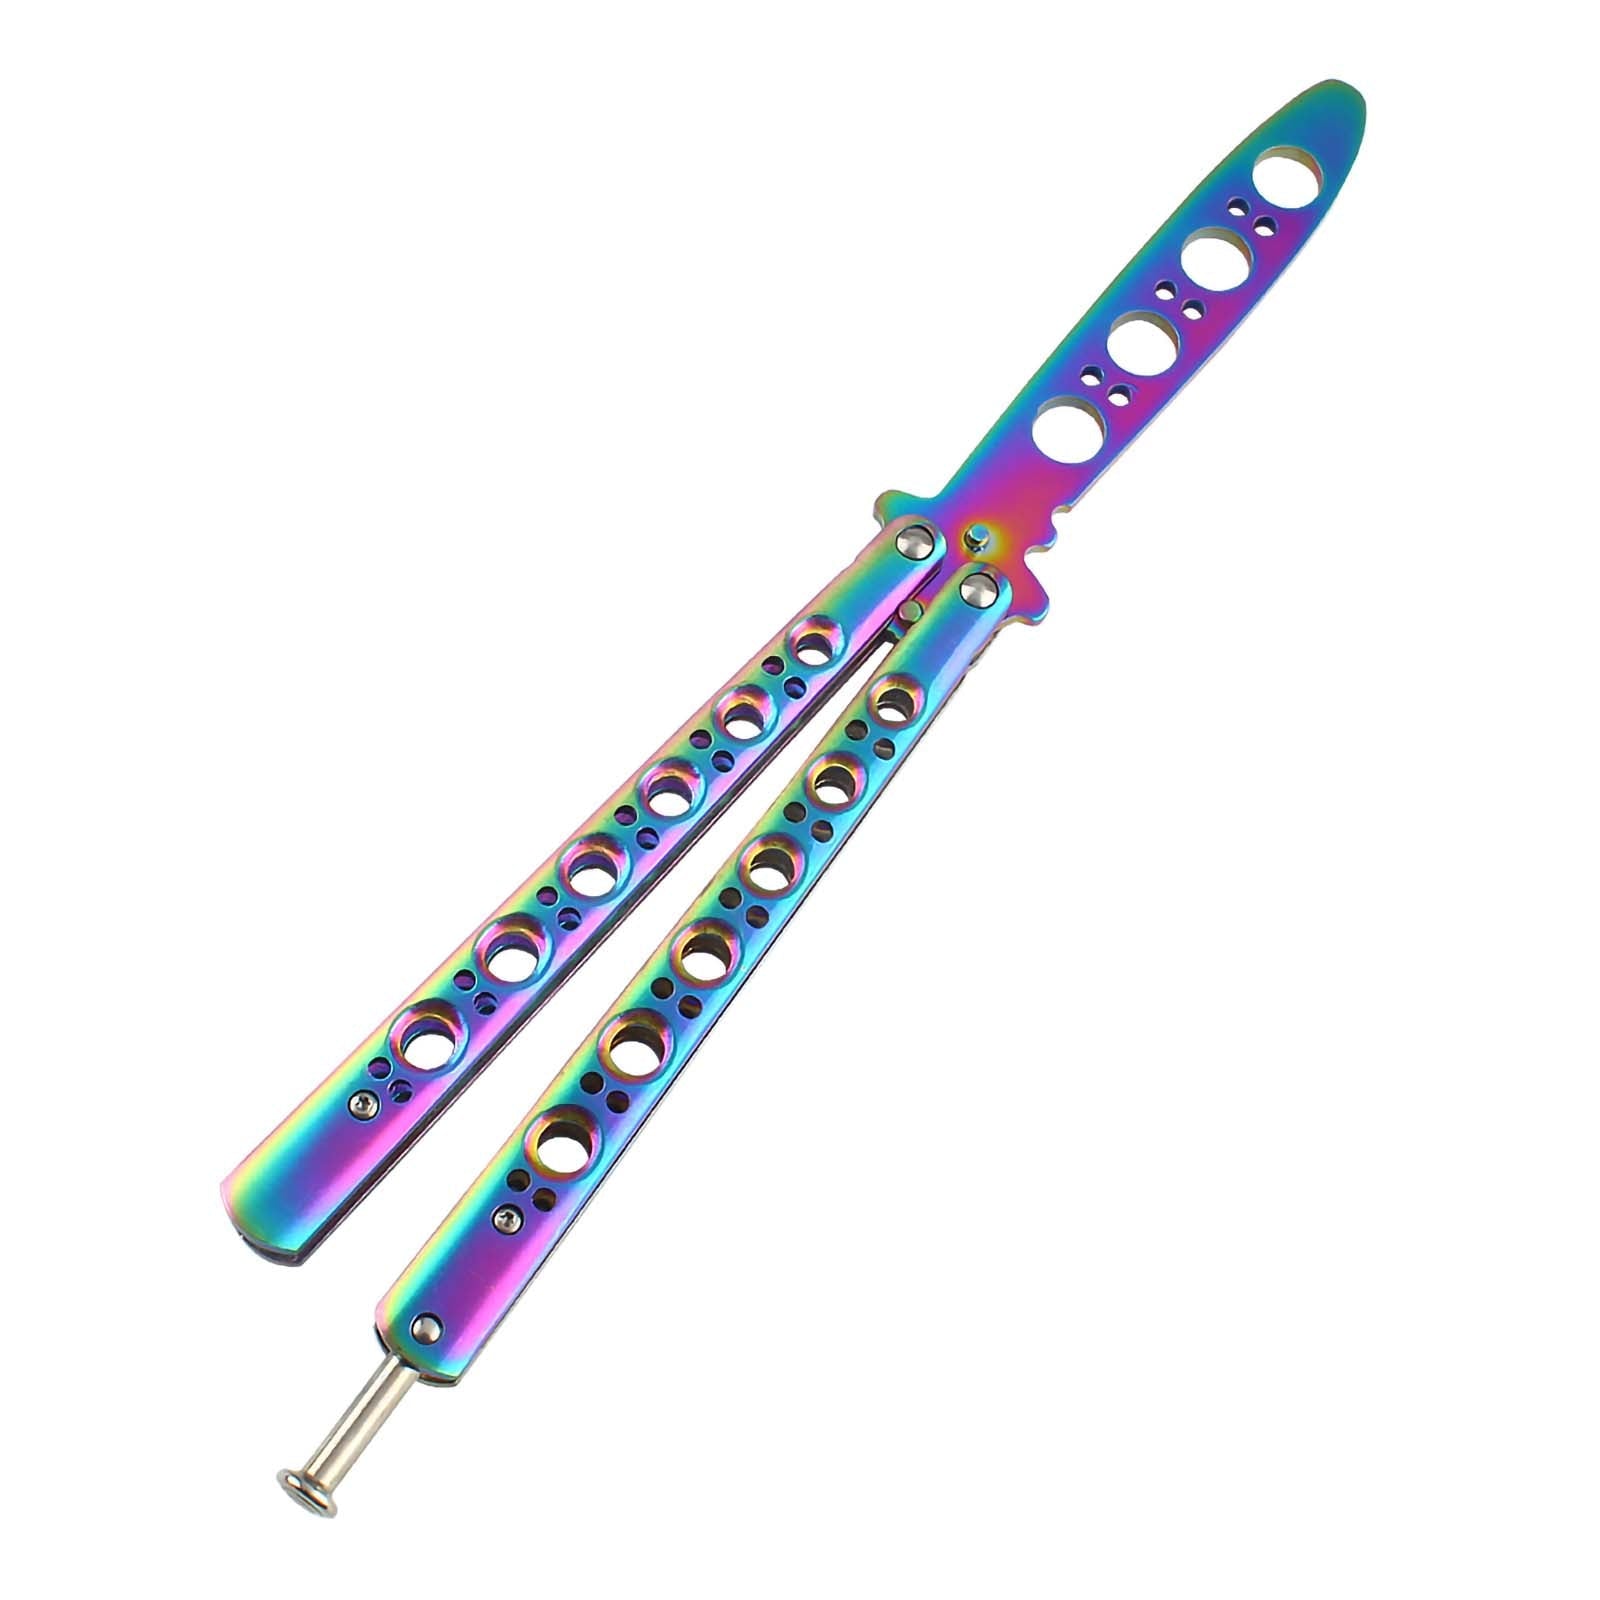 Andux Balisong Polished Colorful CS/HDD24(Only Available in European Countries)